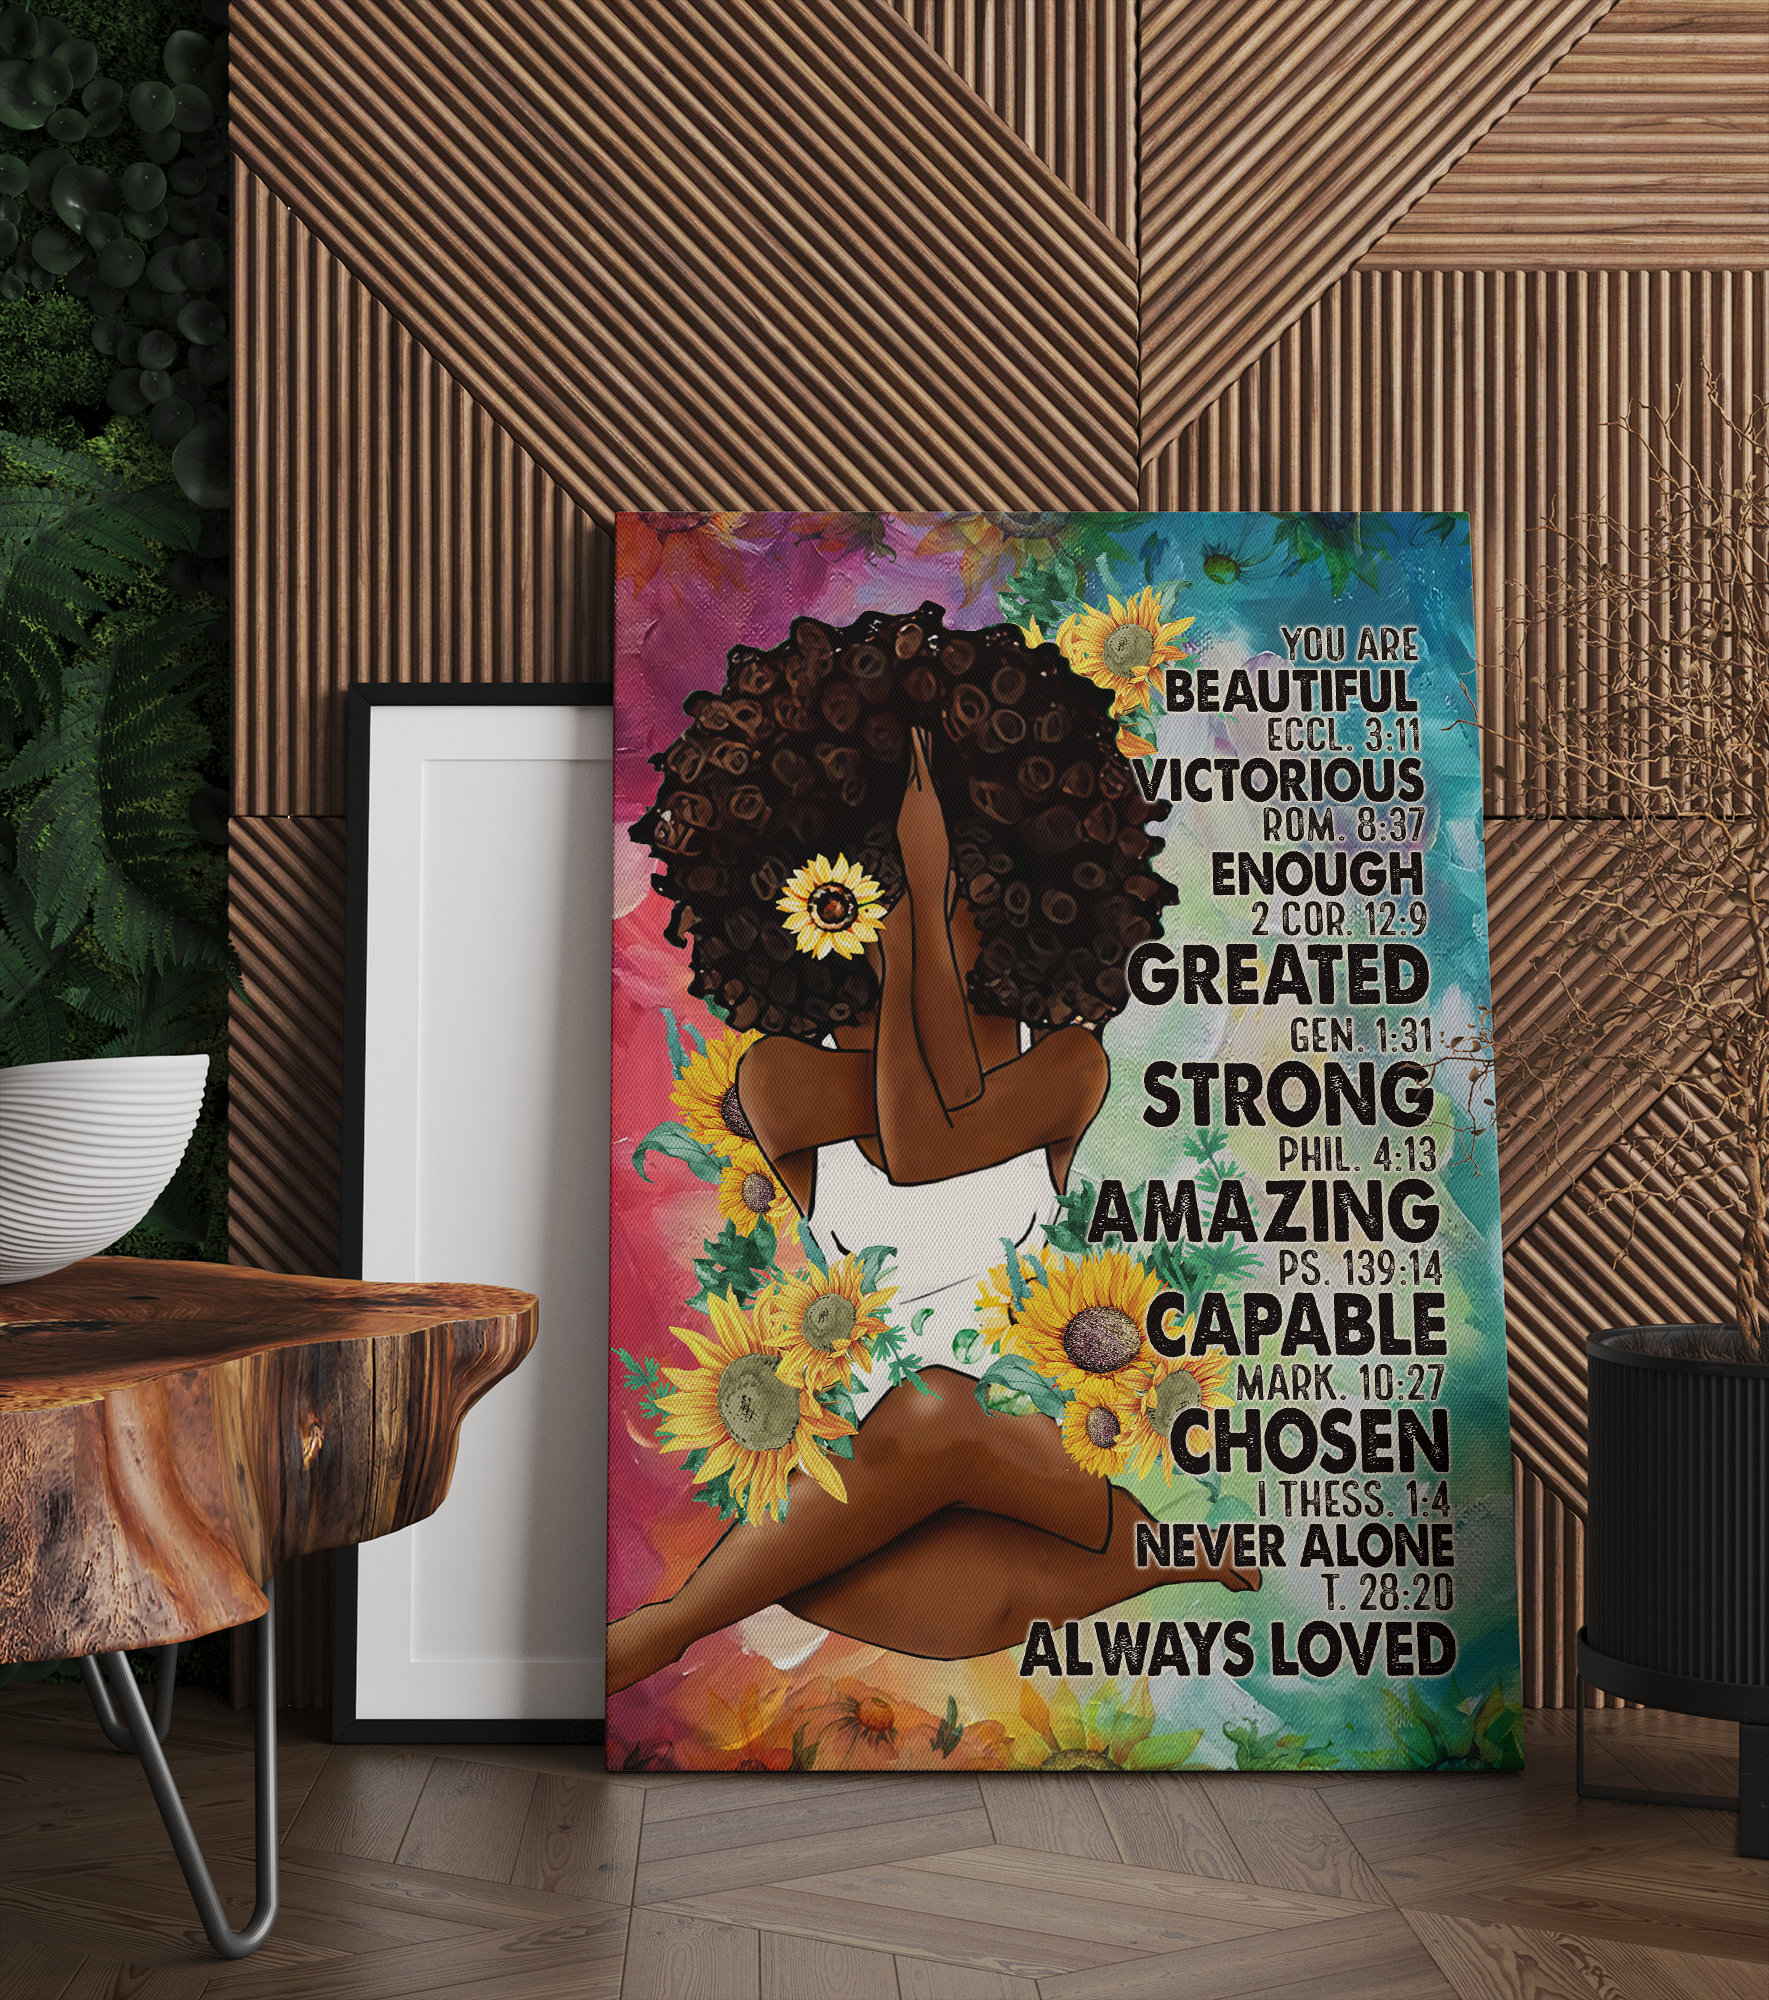 Black Queen Yoga You Are Beautiful Victorious Enough Never Alone Always Loved Canvas Print